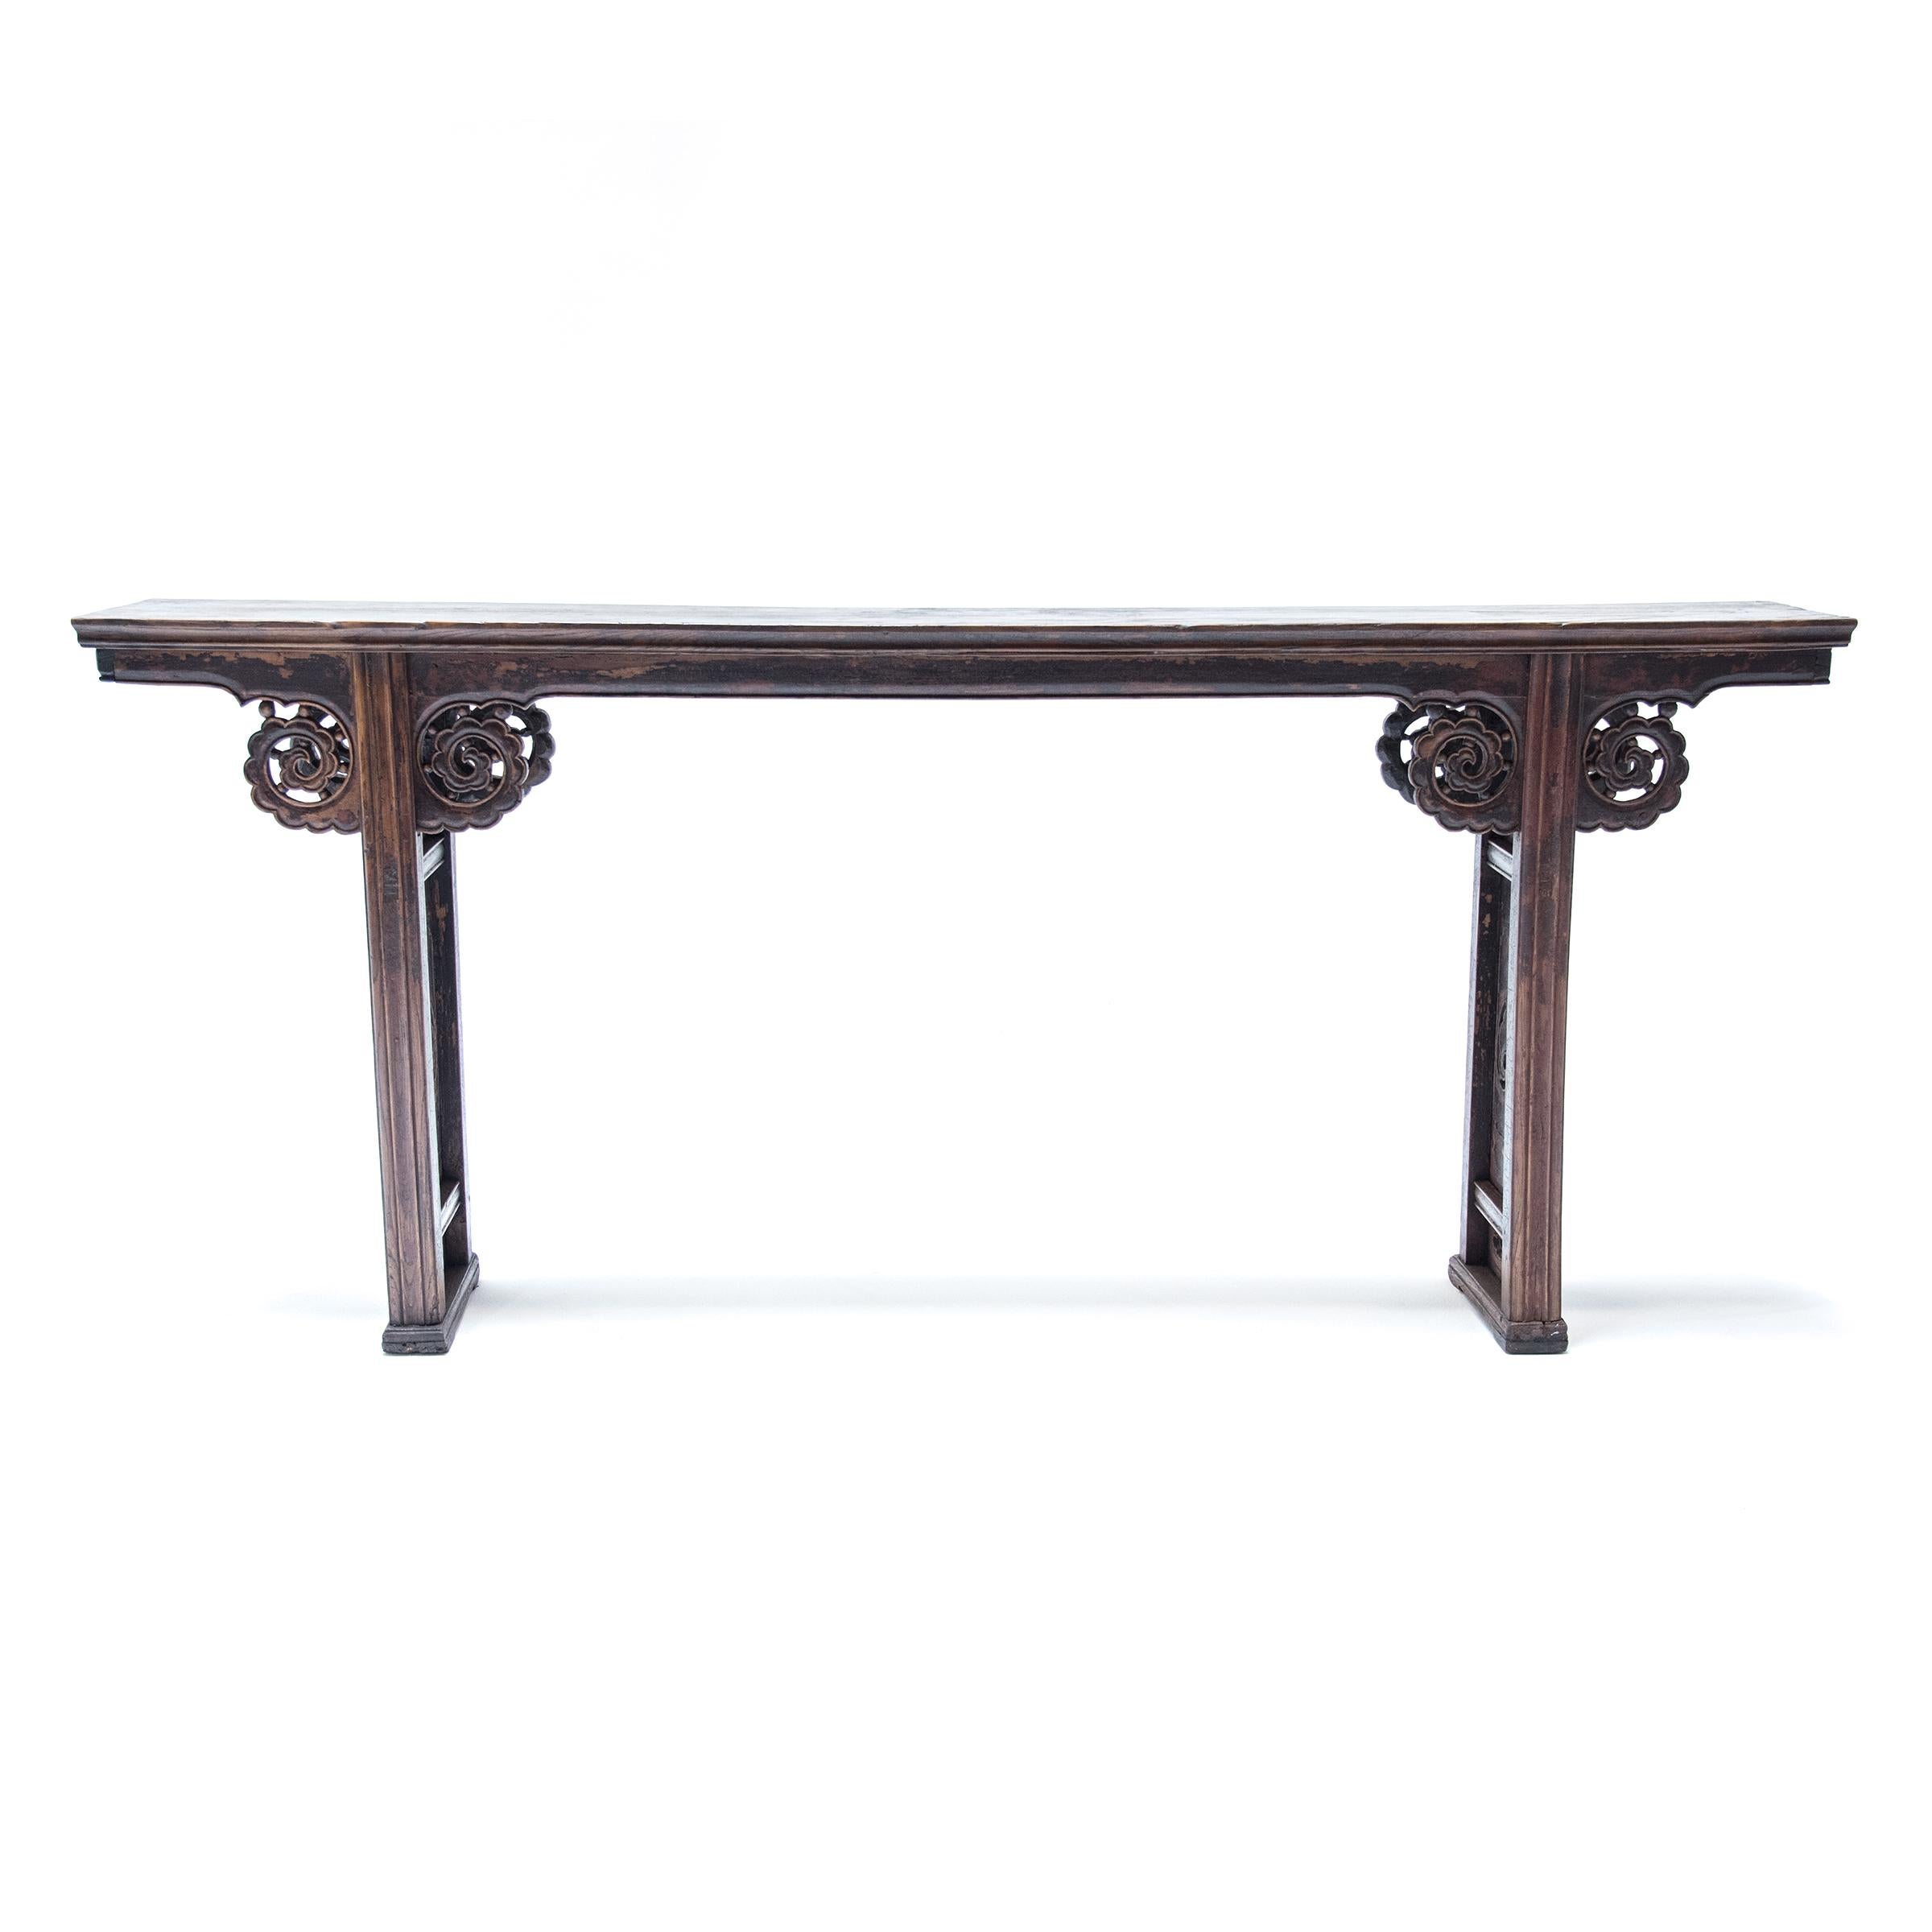 This gorgeous 19th-century console table was finely crafted from walnut by an artisan in China's Shanxi province. The narrow form would have been ideal for displaying painted scrolls or works of calligraphy. The plank-top surface is supported by